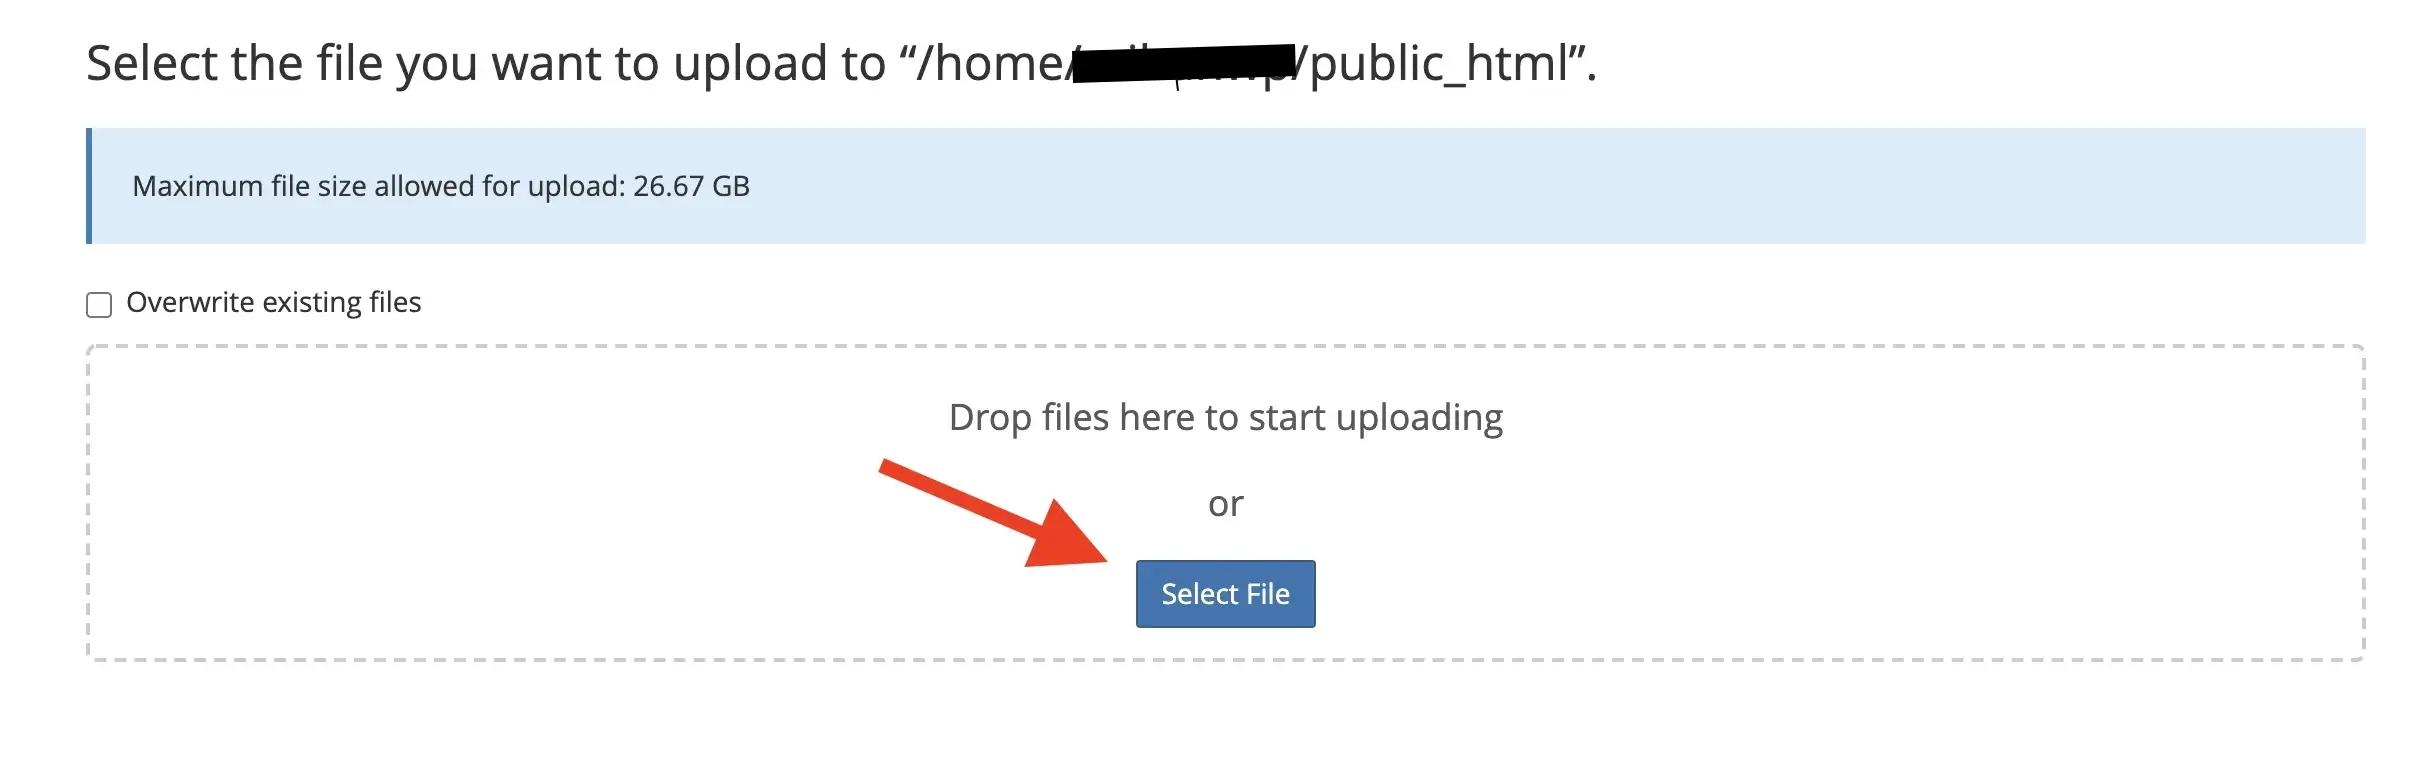 select file for upload